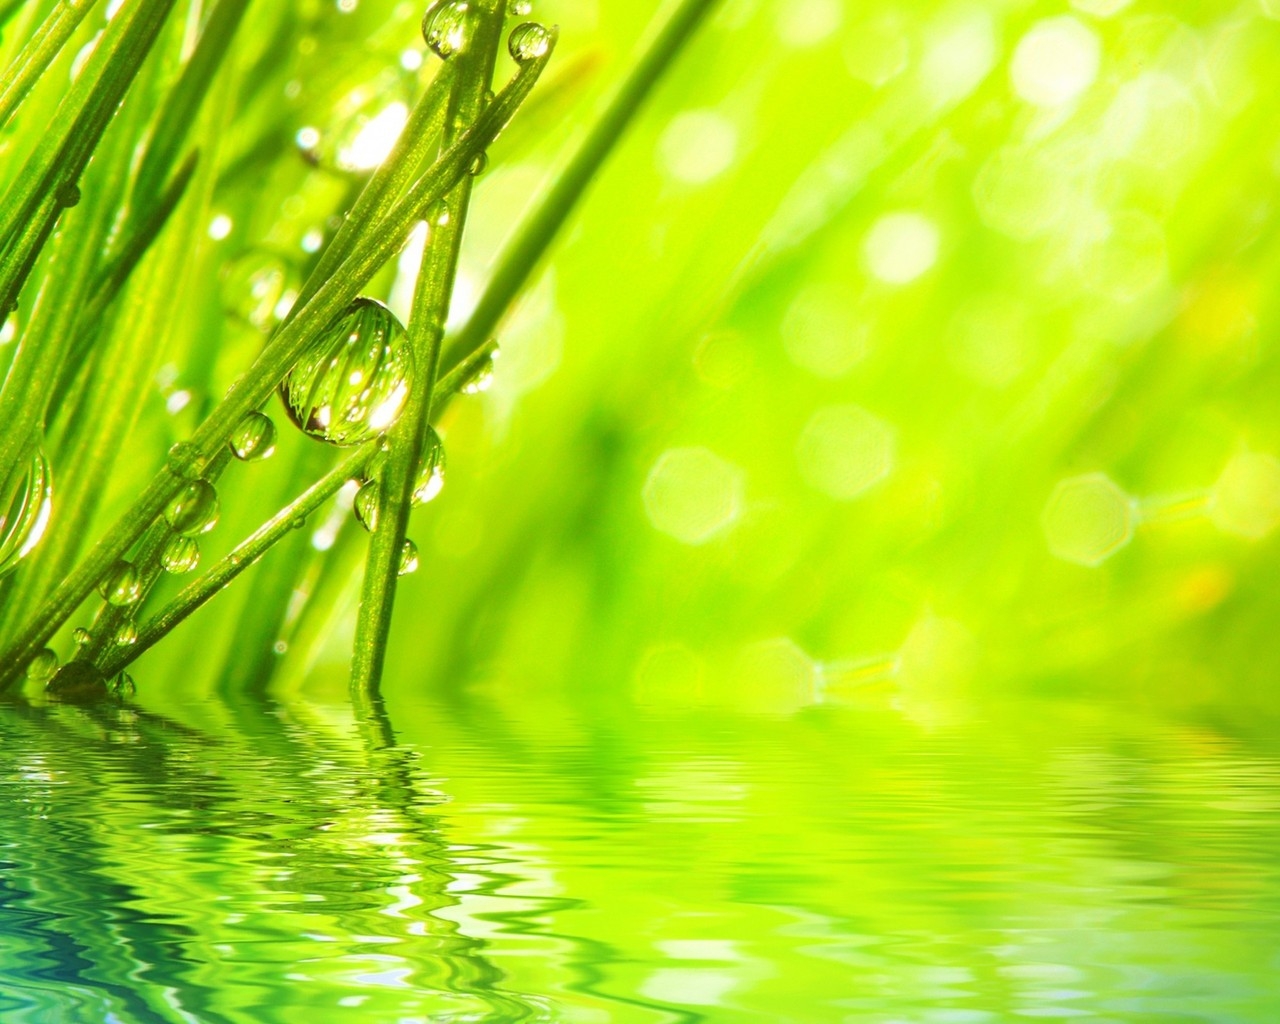 Water Drops on Grass for 1280 x 1024 resolution